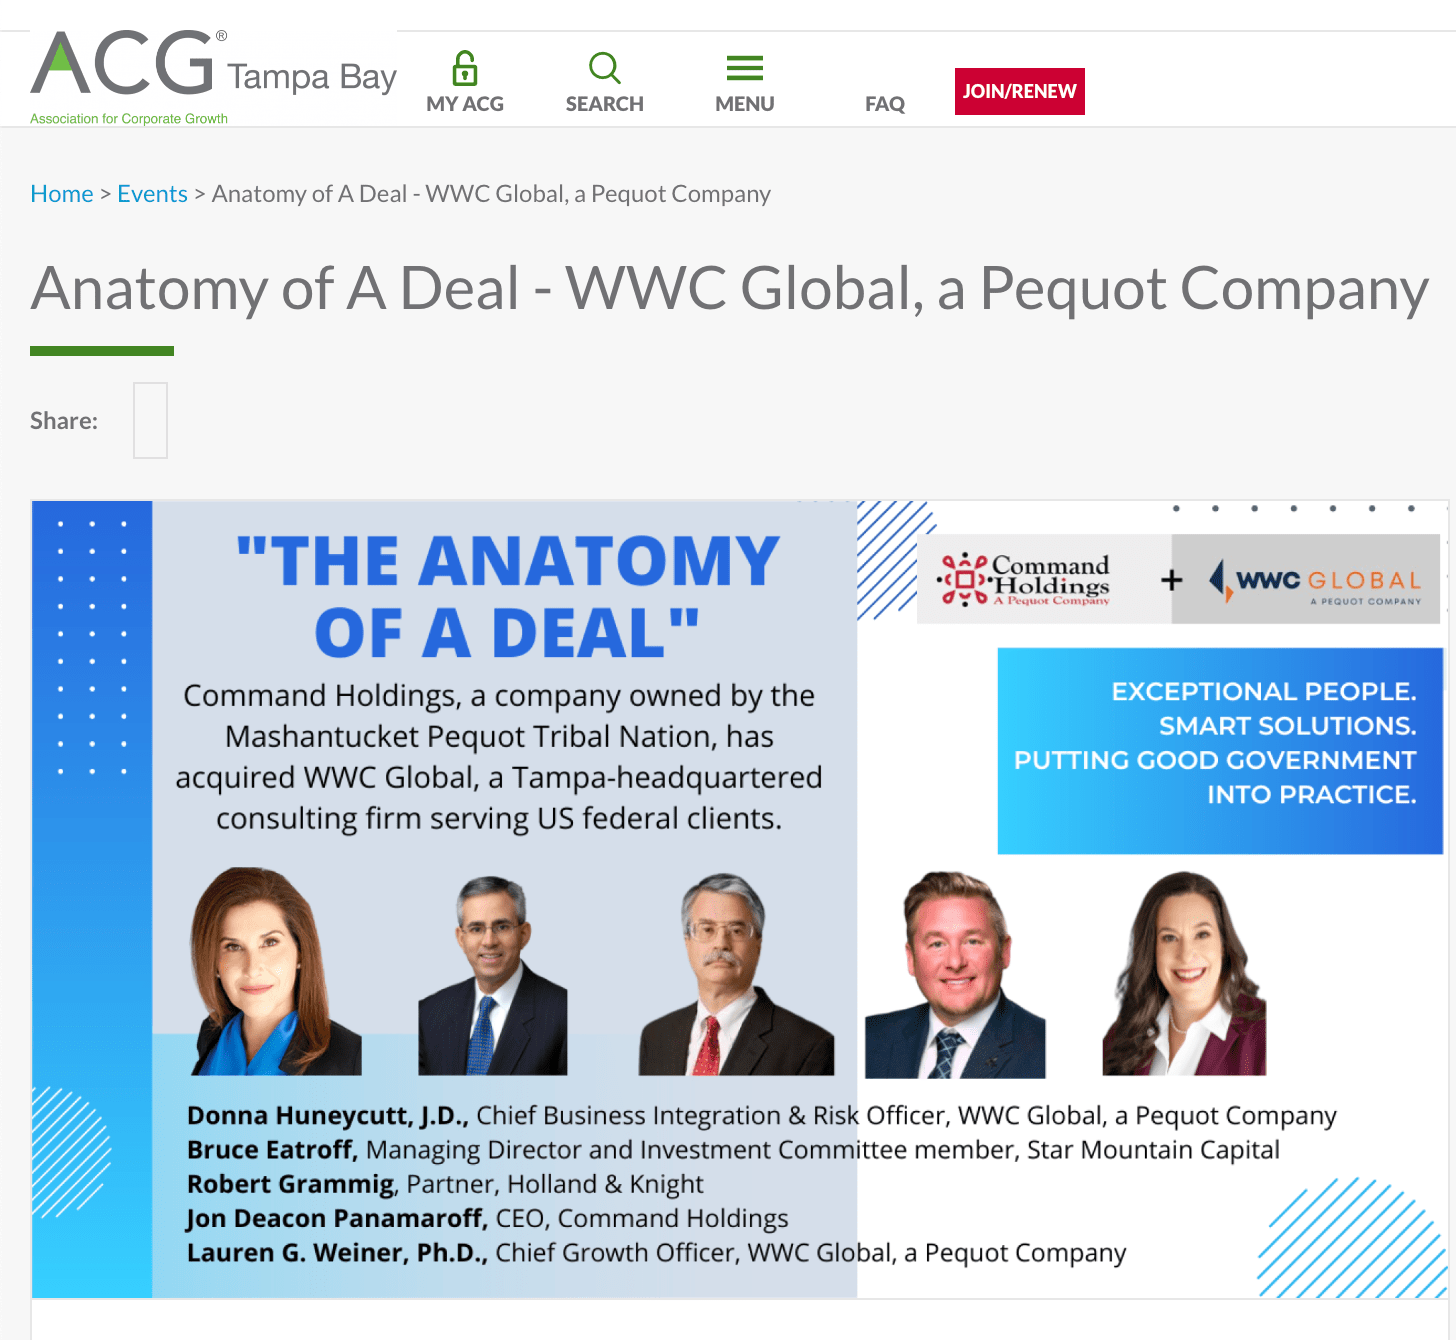 Association for Corporate Growth, Anatomy of a Deal